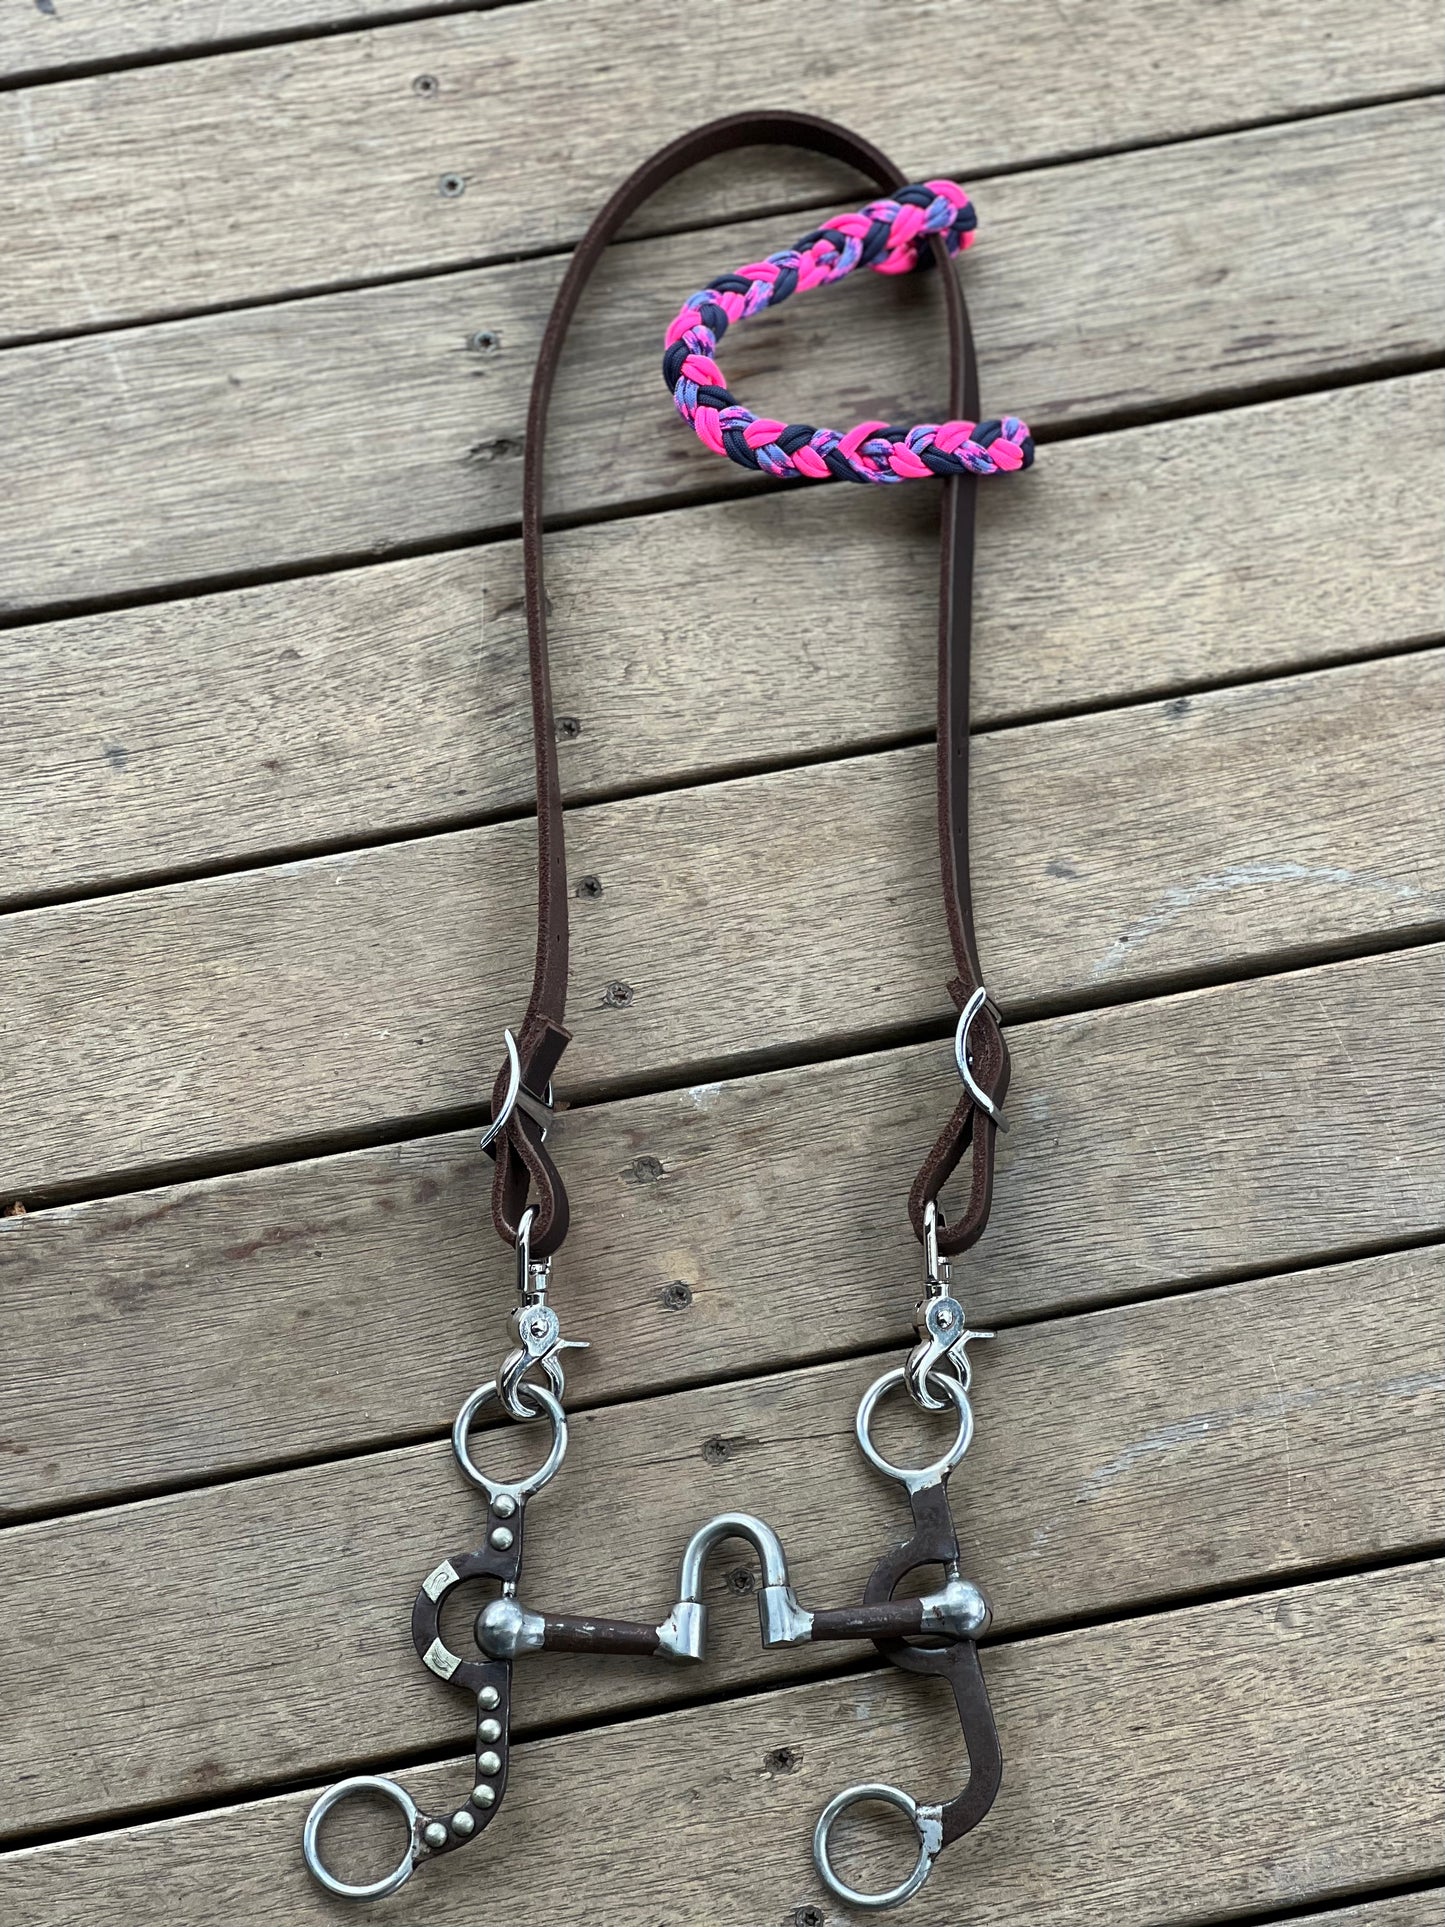 Quick Switch Bridle - Bright Spark